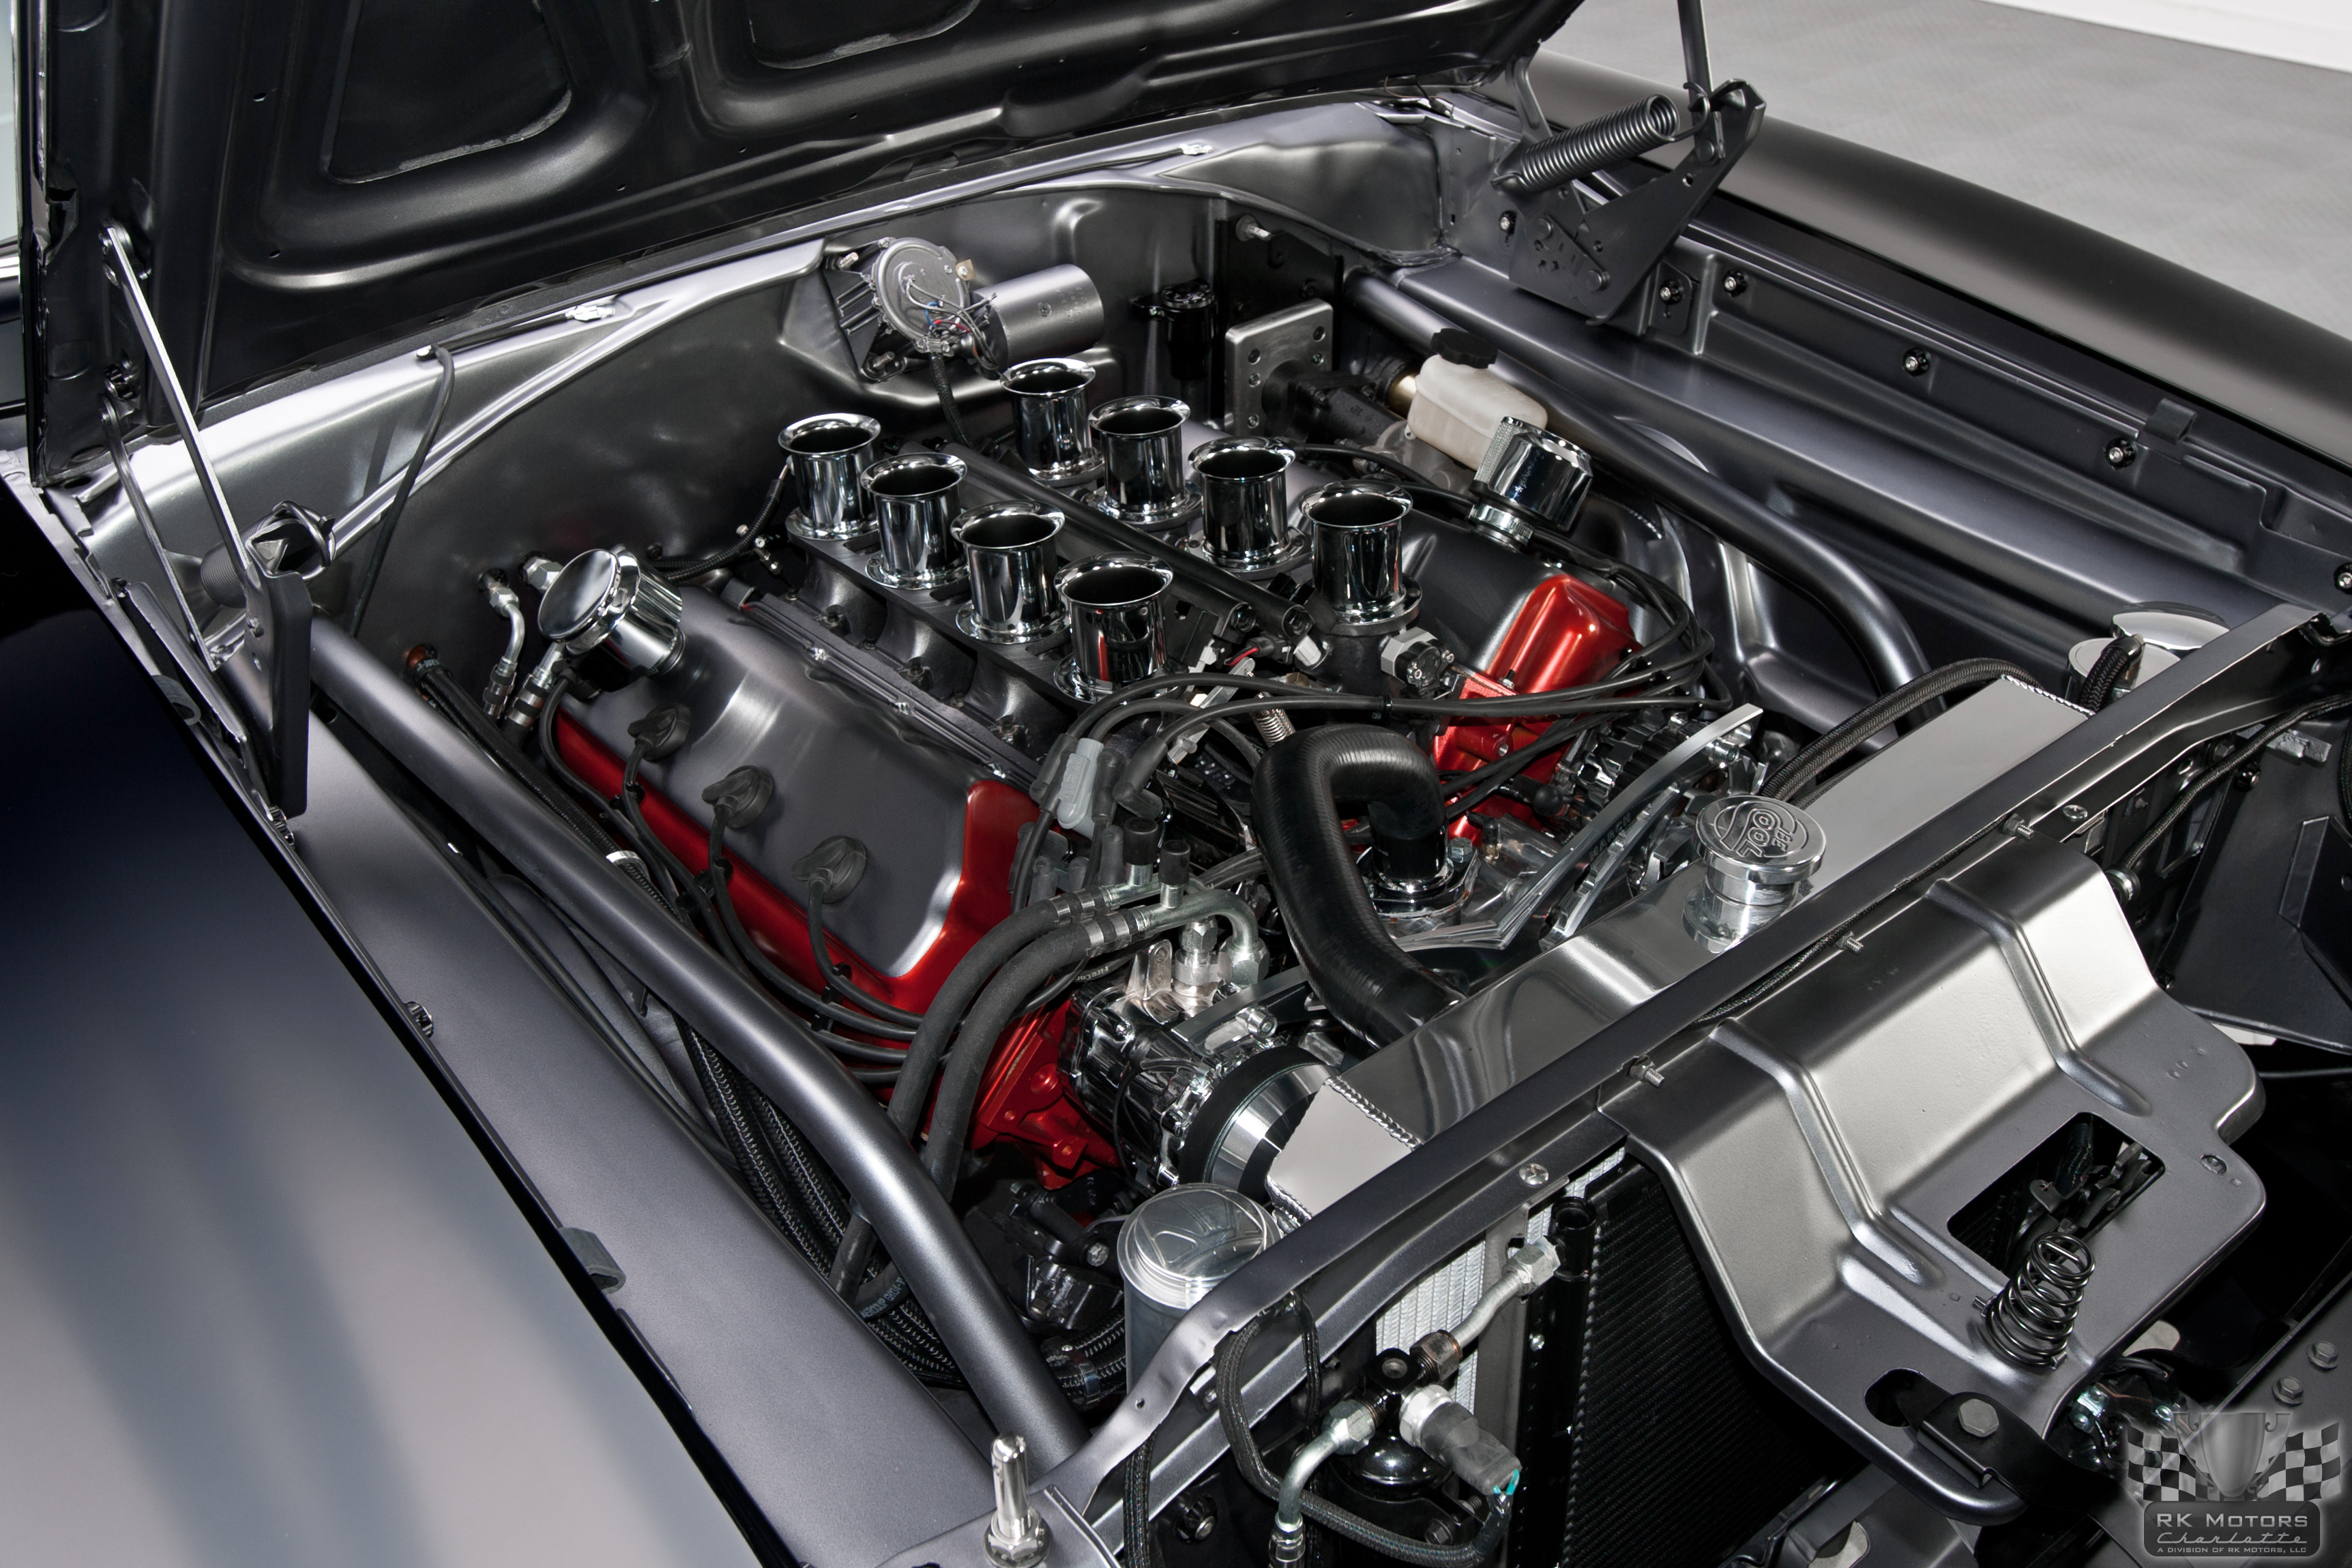 charger, R t, Indy, 426, Hemi, Muscle, Cars, Hot, Rod, Engine Wallpaper